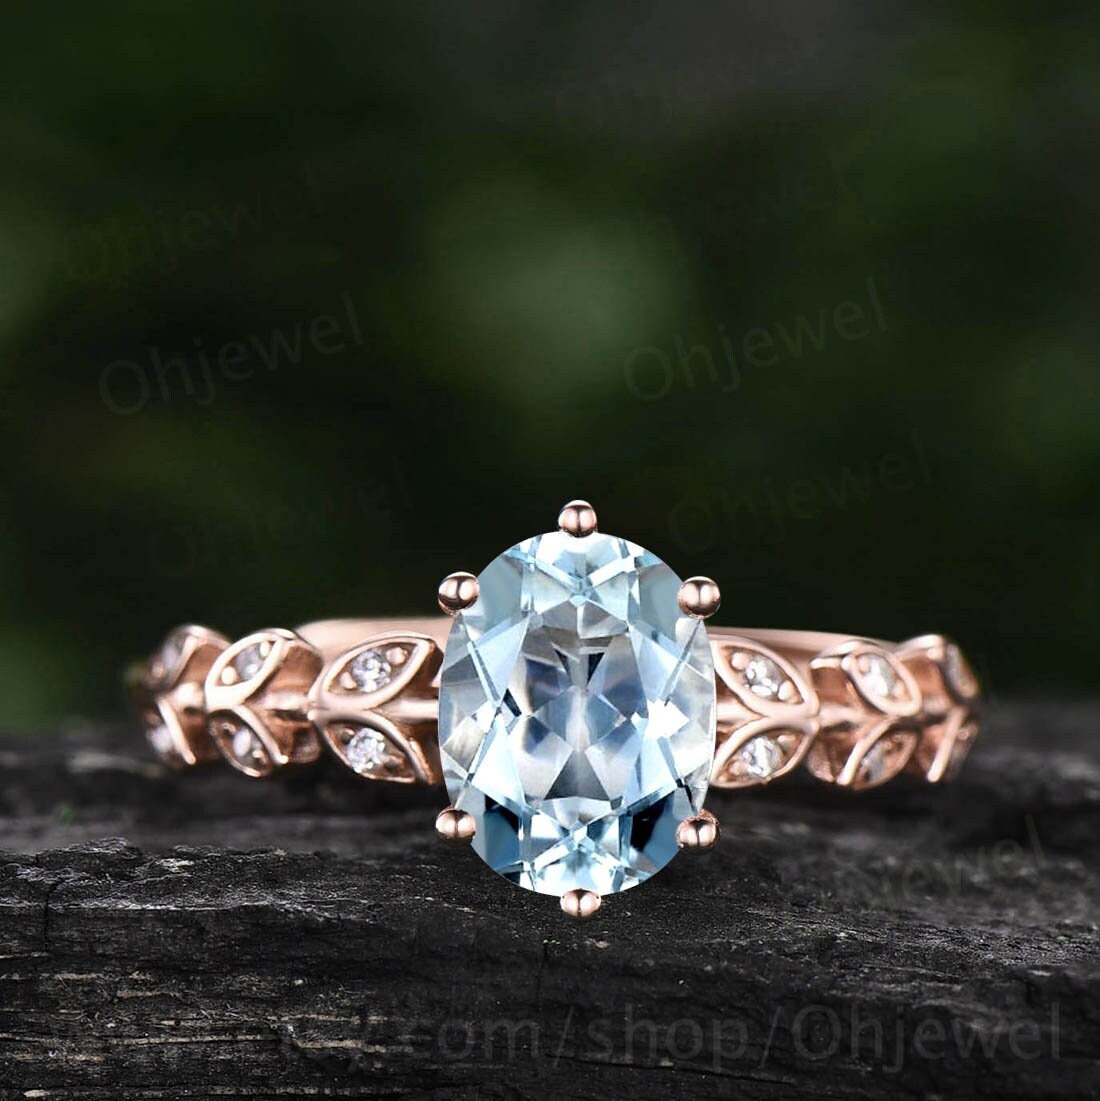 1.5ct oval cut Aquamarine engagement ring solid 14k rose gold art deco branches leaf Leaves twig nature inspired unique wedding ring women